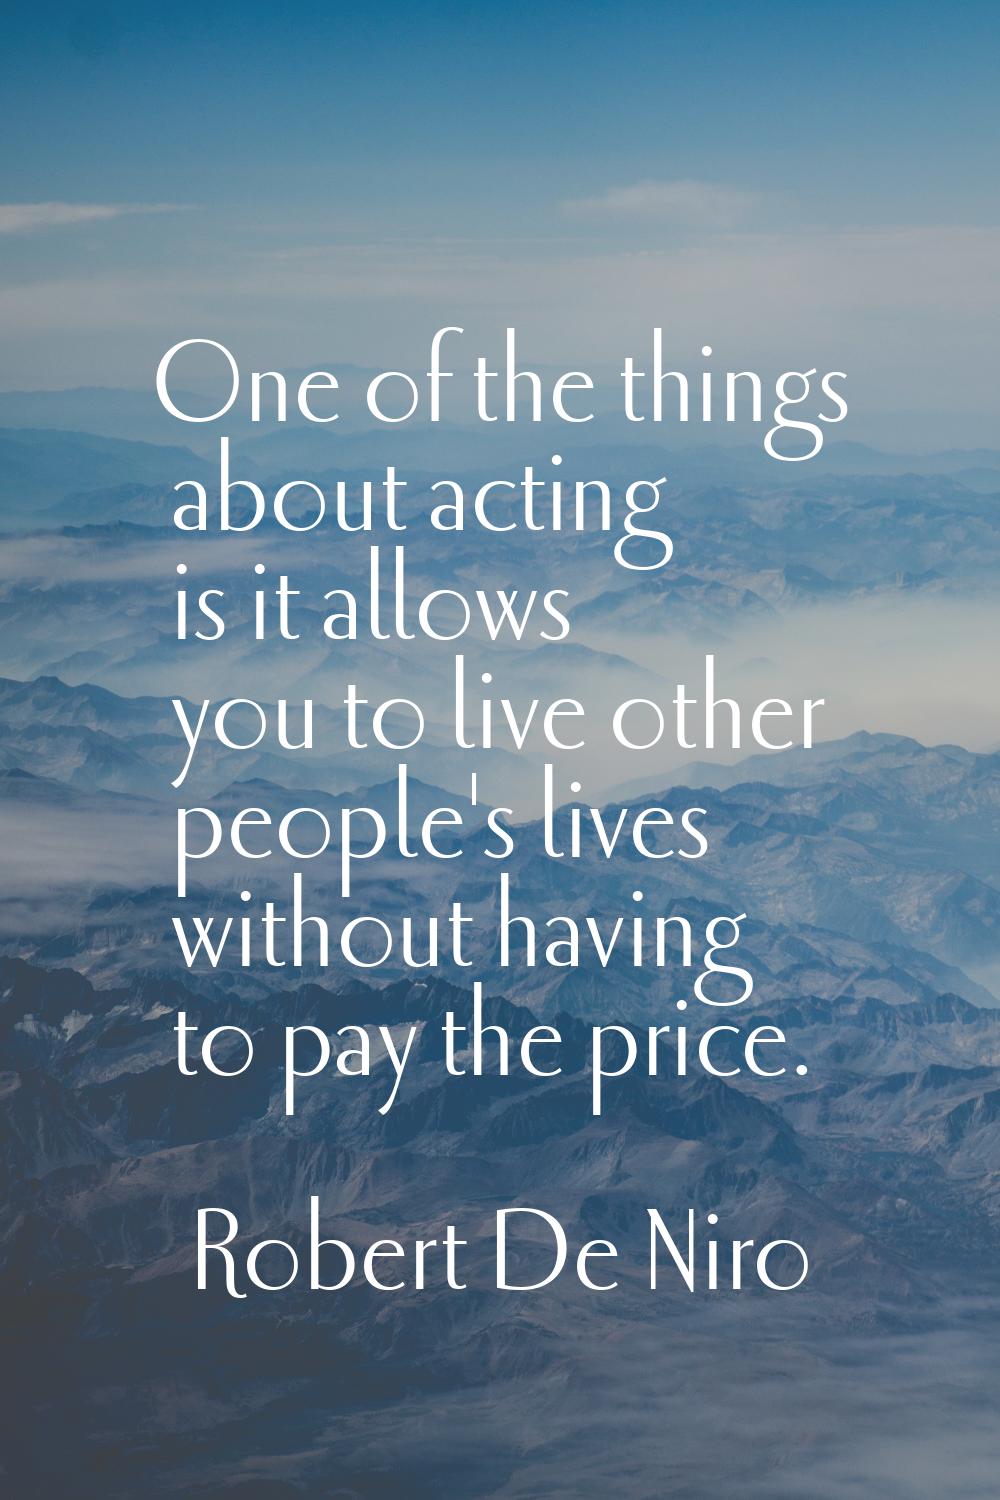 One of the things about acting is it allows you to live other people's lives without having to pay 